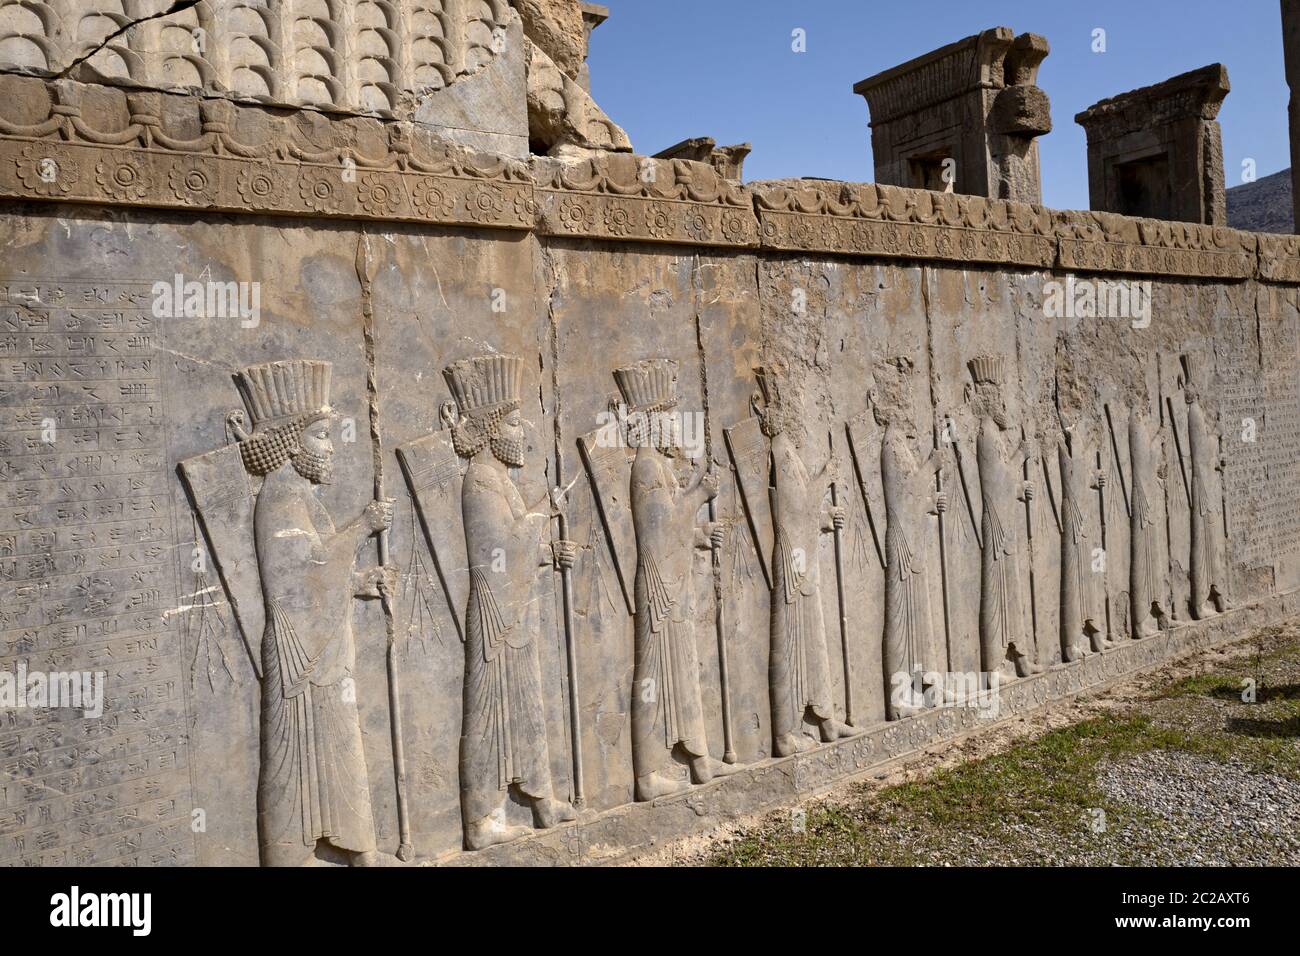 The archeological's site of the ancient persian city, Persepolis; a UNESCO world heritage site, nearby Shiraz, in Iran. Stock Photo